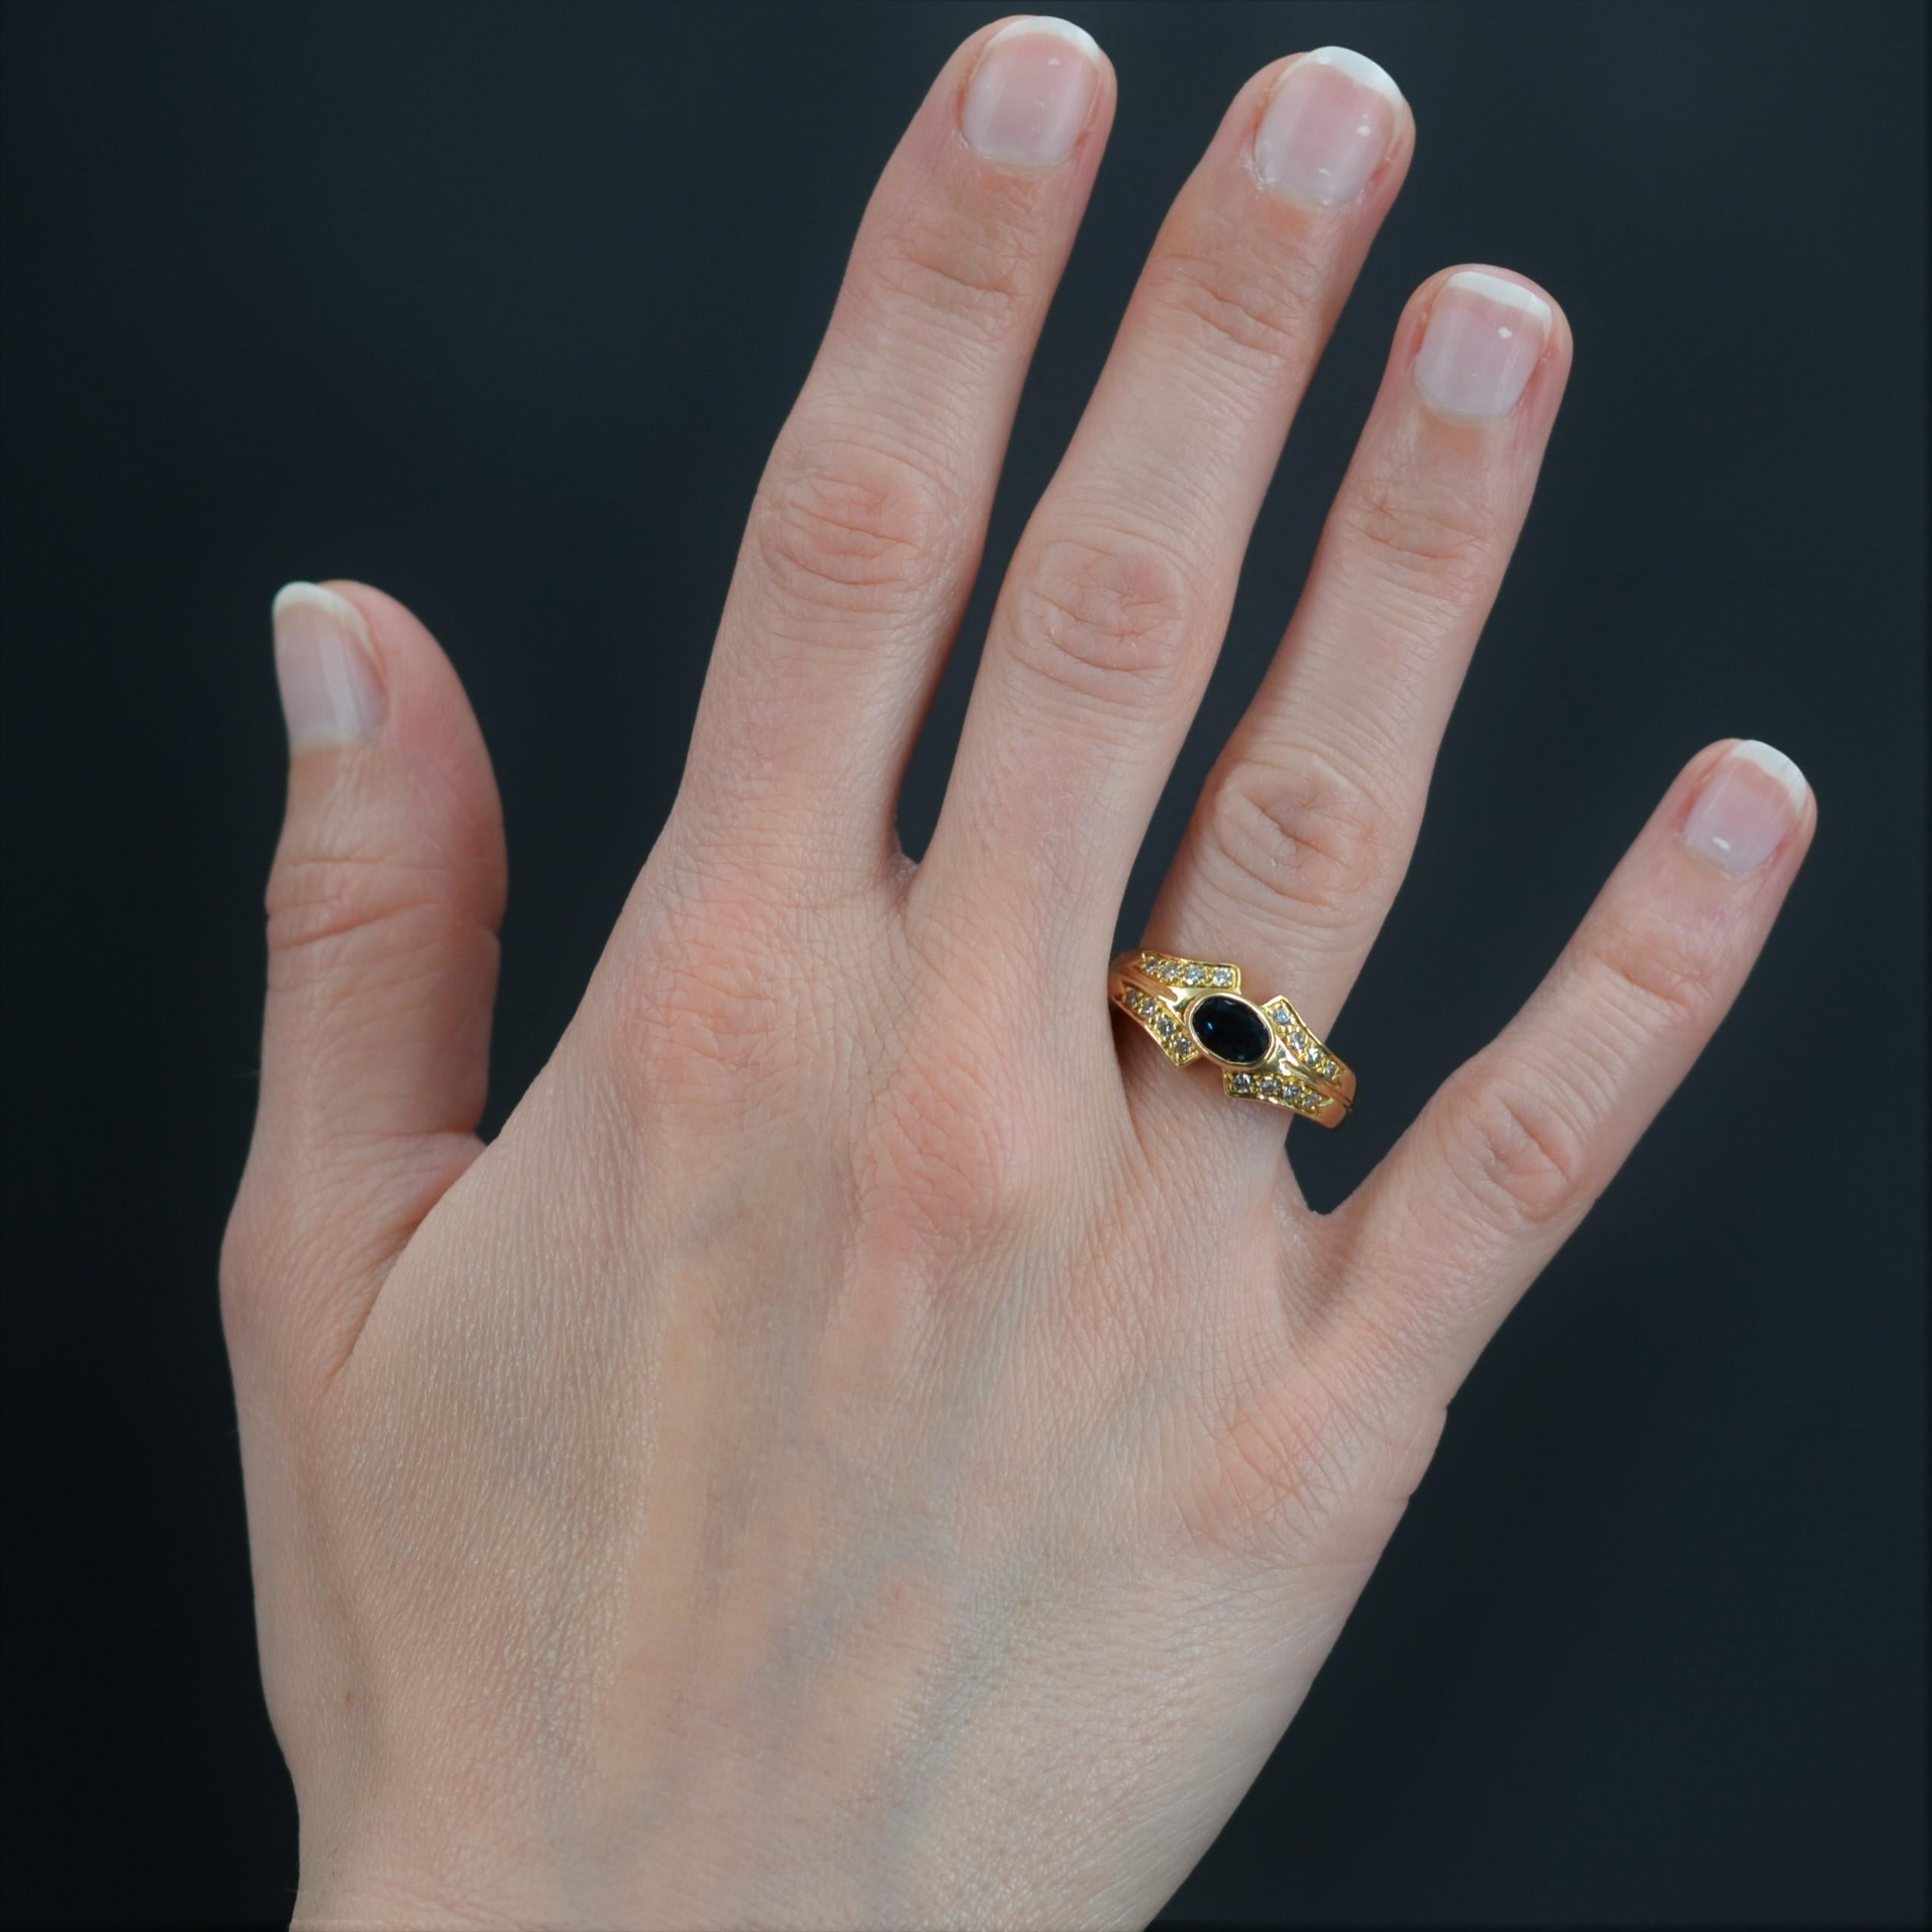 Ring in 18 karat yellow gold, eagle head hallmark.
Gold ring, it is decorated with an oval sapphire in closed setting. On both sides 2 x 2 lines of 4 modern brilliant- cut diamonds decorate the ring.
Weight of the sapphire : about 0.65 carat, total